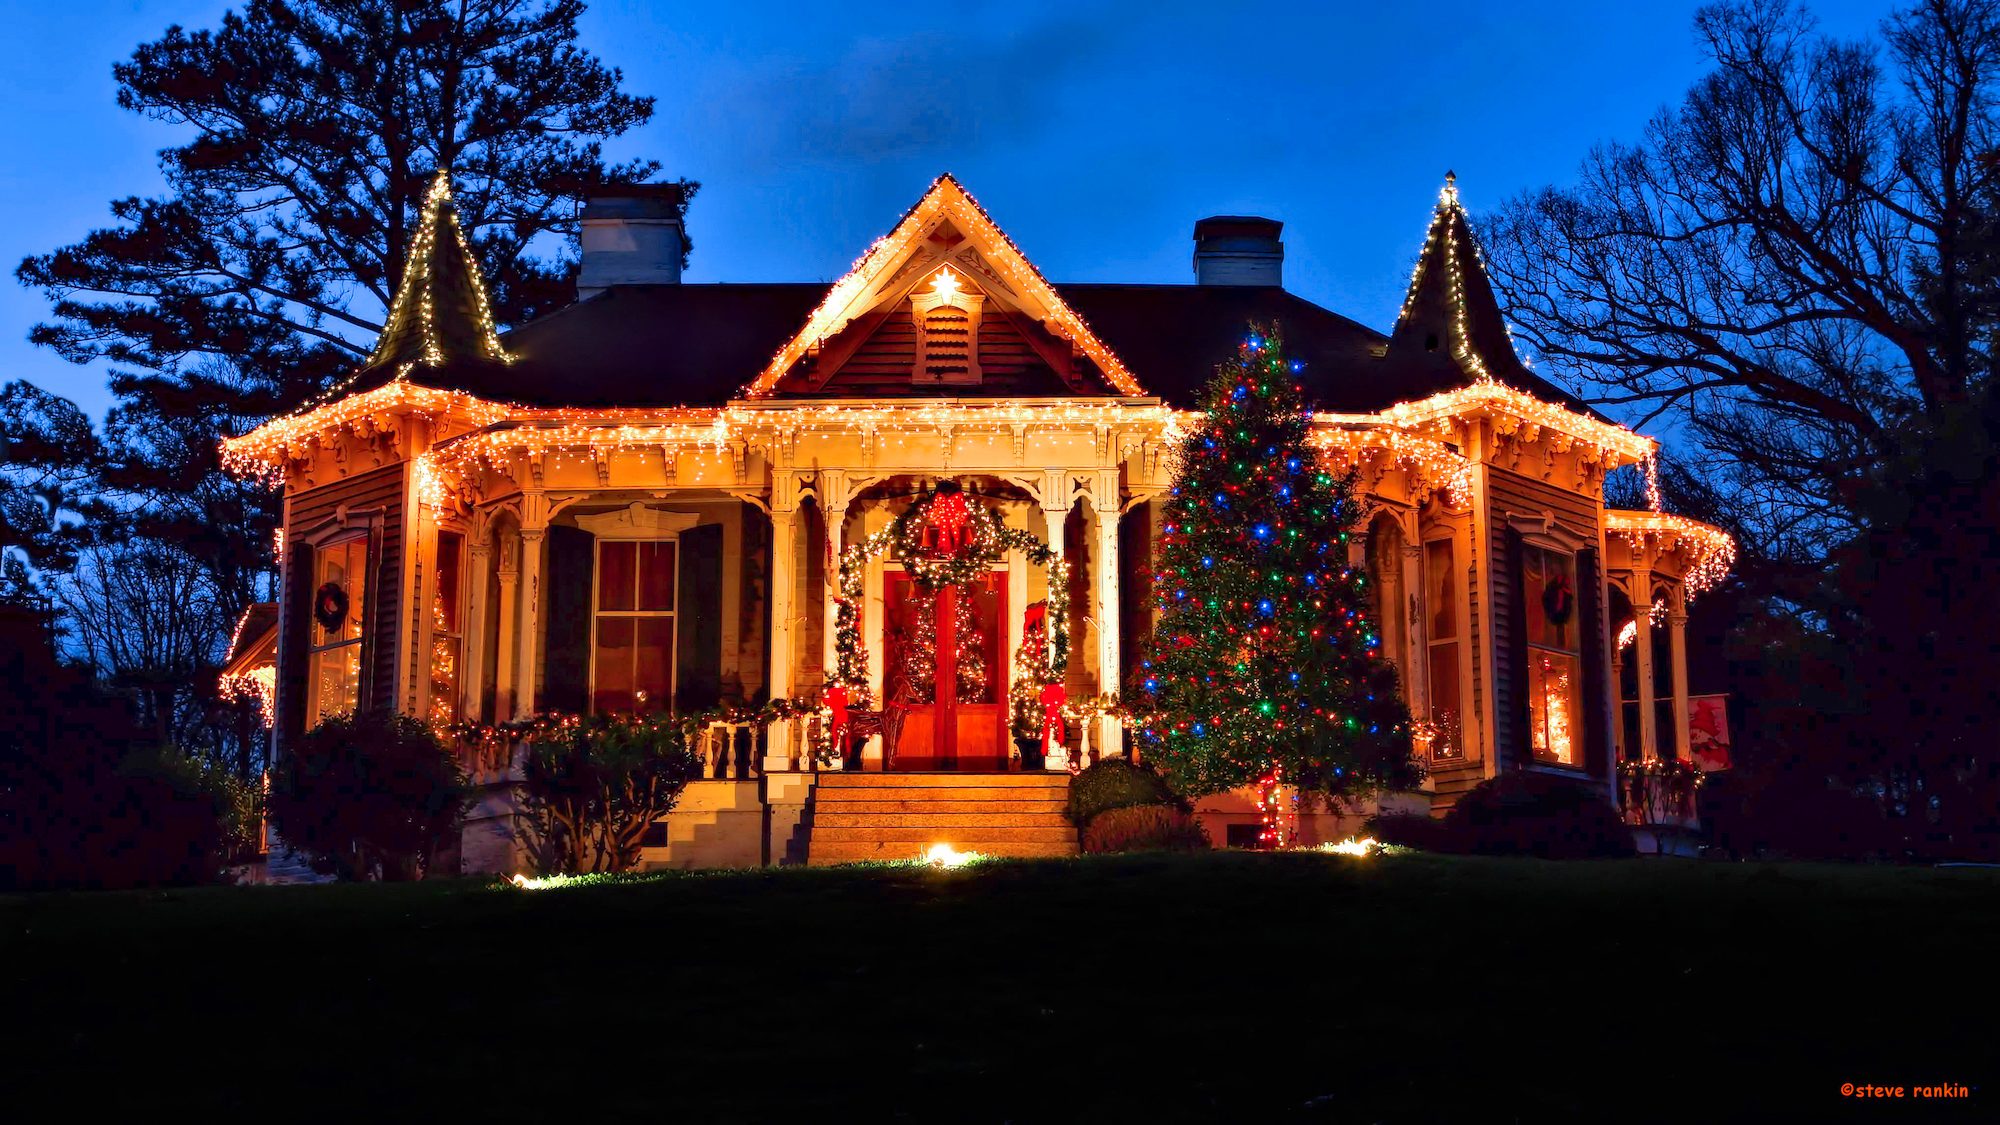 quaint towns to visit for christmas